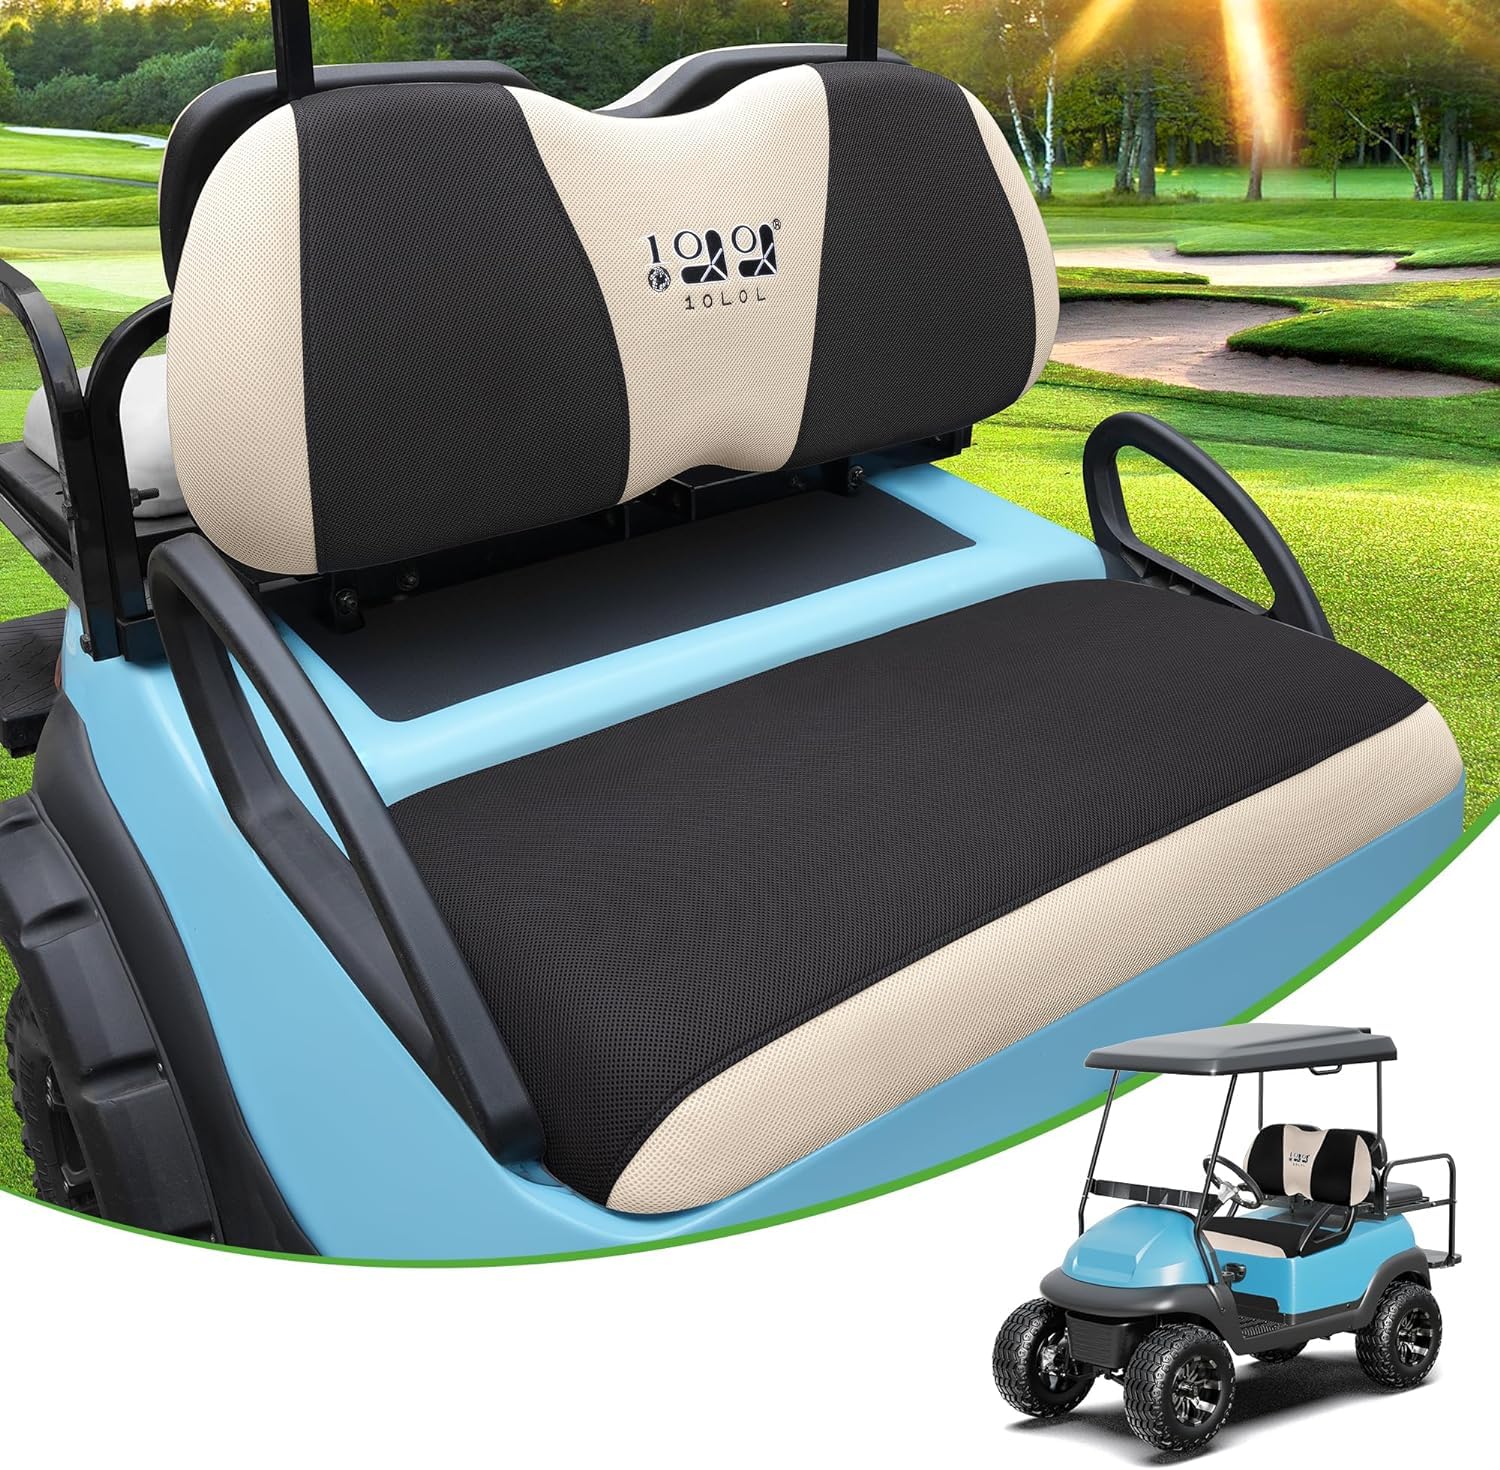 10L0L Golf Cart Seat Covers Full Front Seats, Easy Install with Polyester Bench Seat Protector, Universal Fit Accessories for Club Car DS/Precedent/Yamaha … von 10L0L